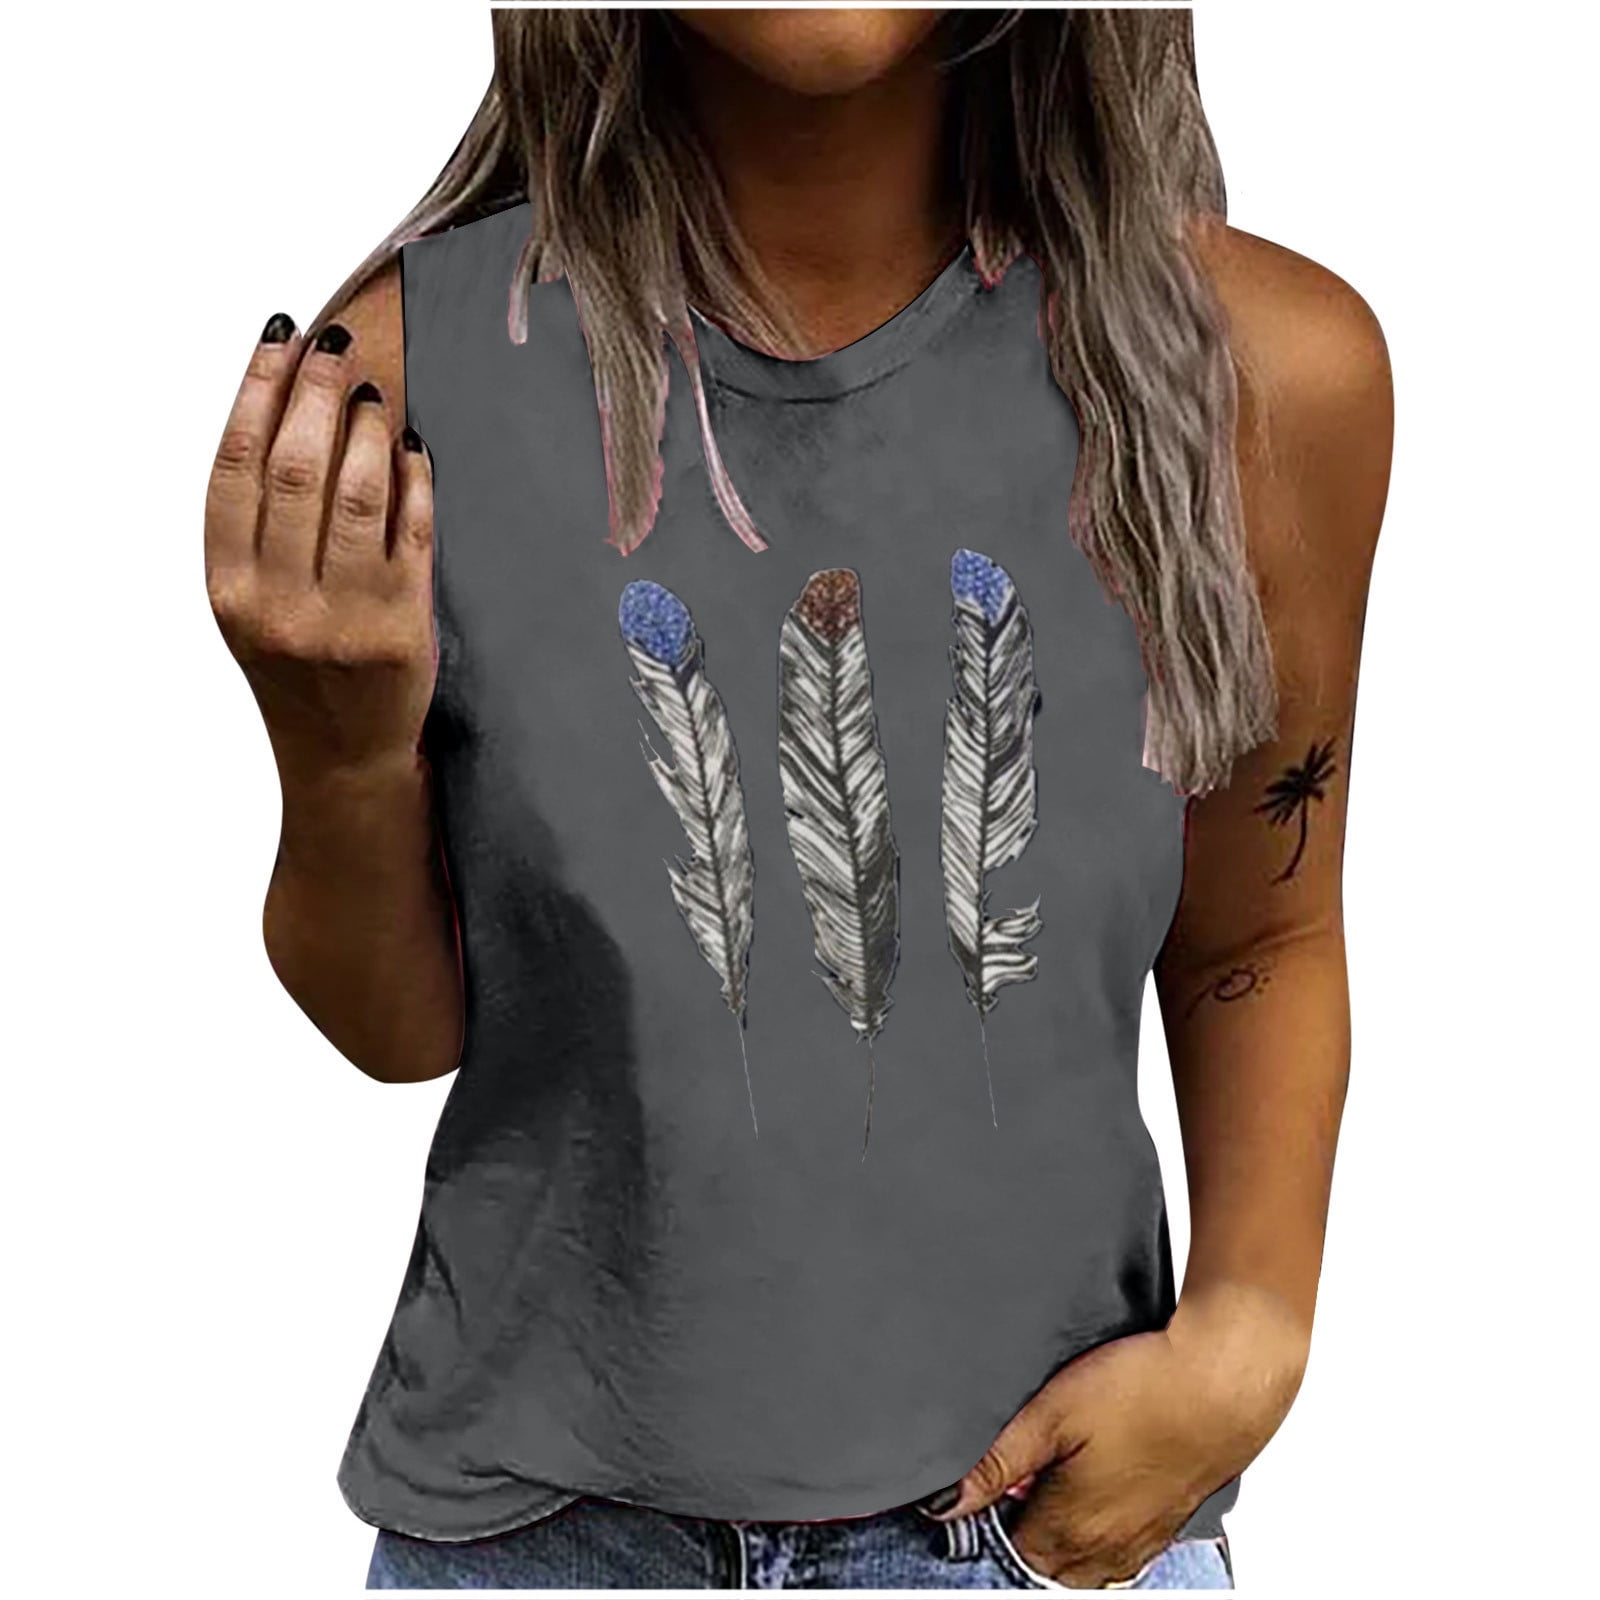  Casual Tops for Women Dressy Summer Feather Print Sleeveless  Crew Neck Tank Shirts Loose Fit Tee Blouses Vest : Sports & Outdoors